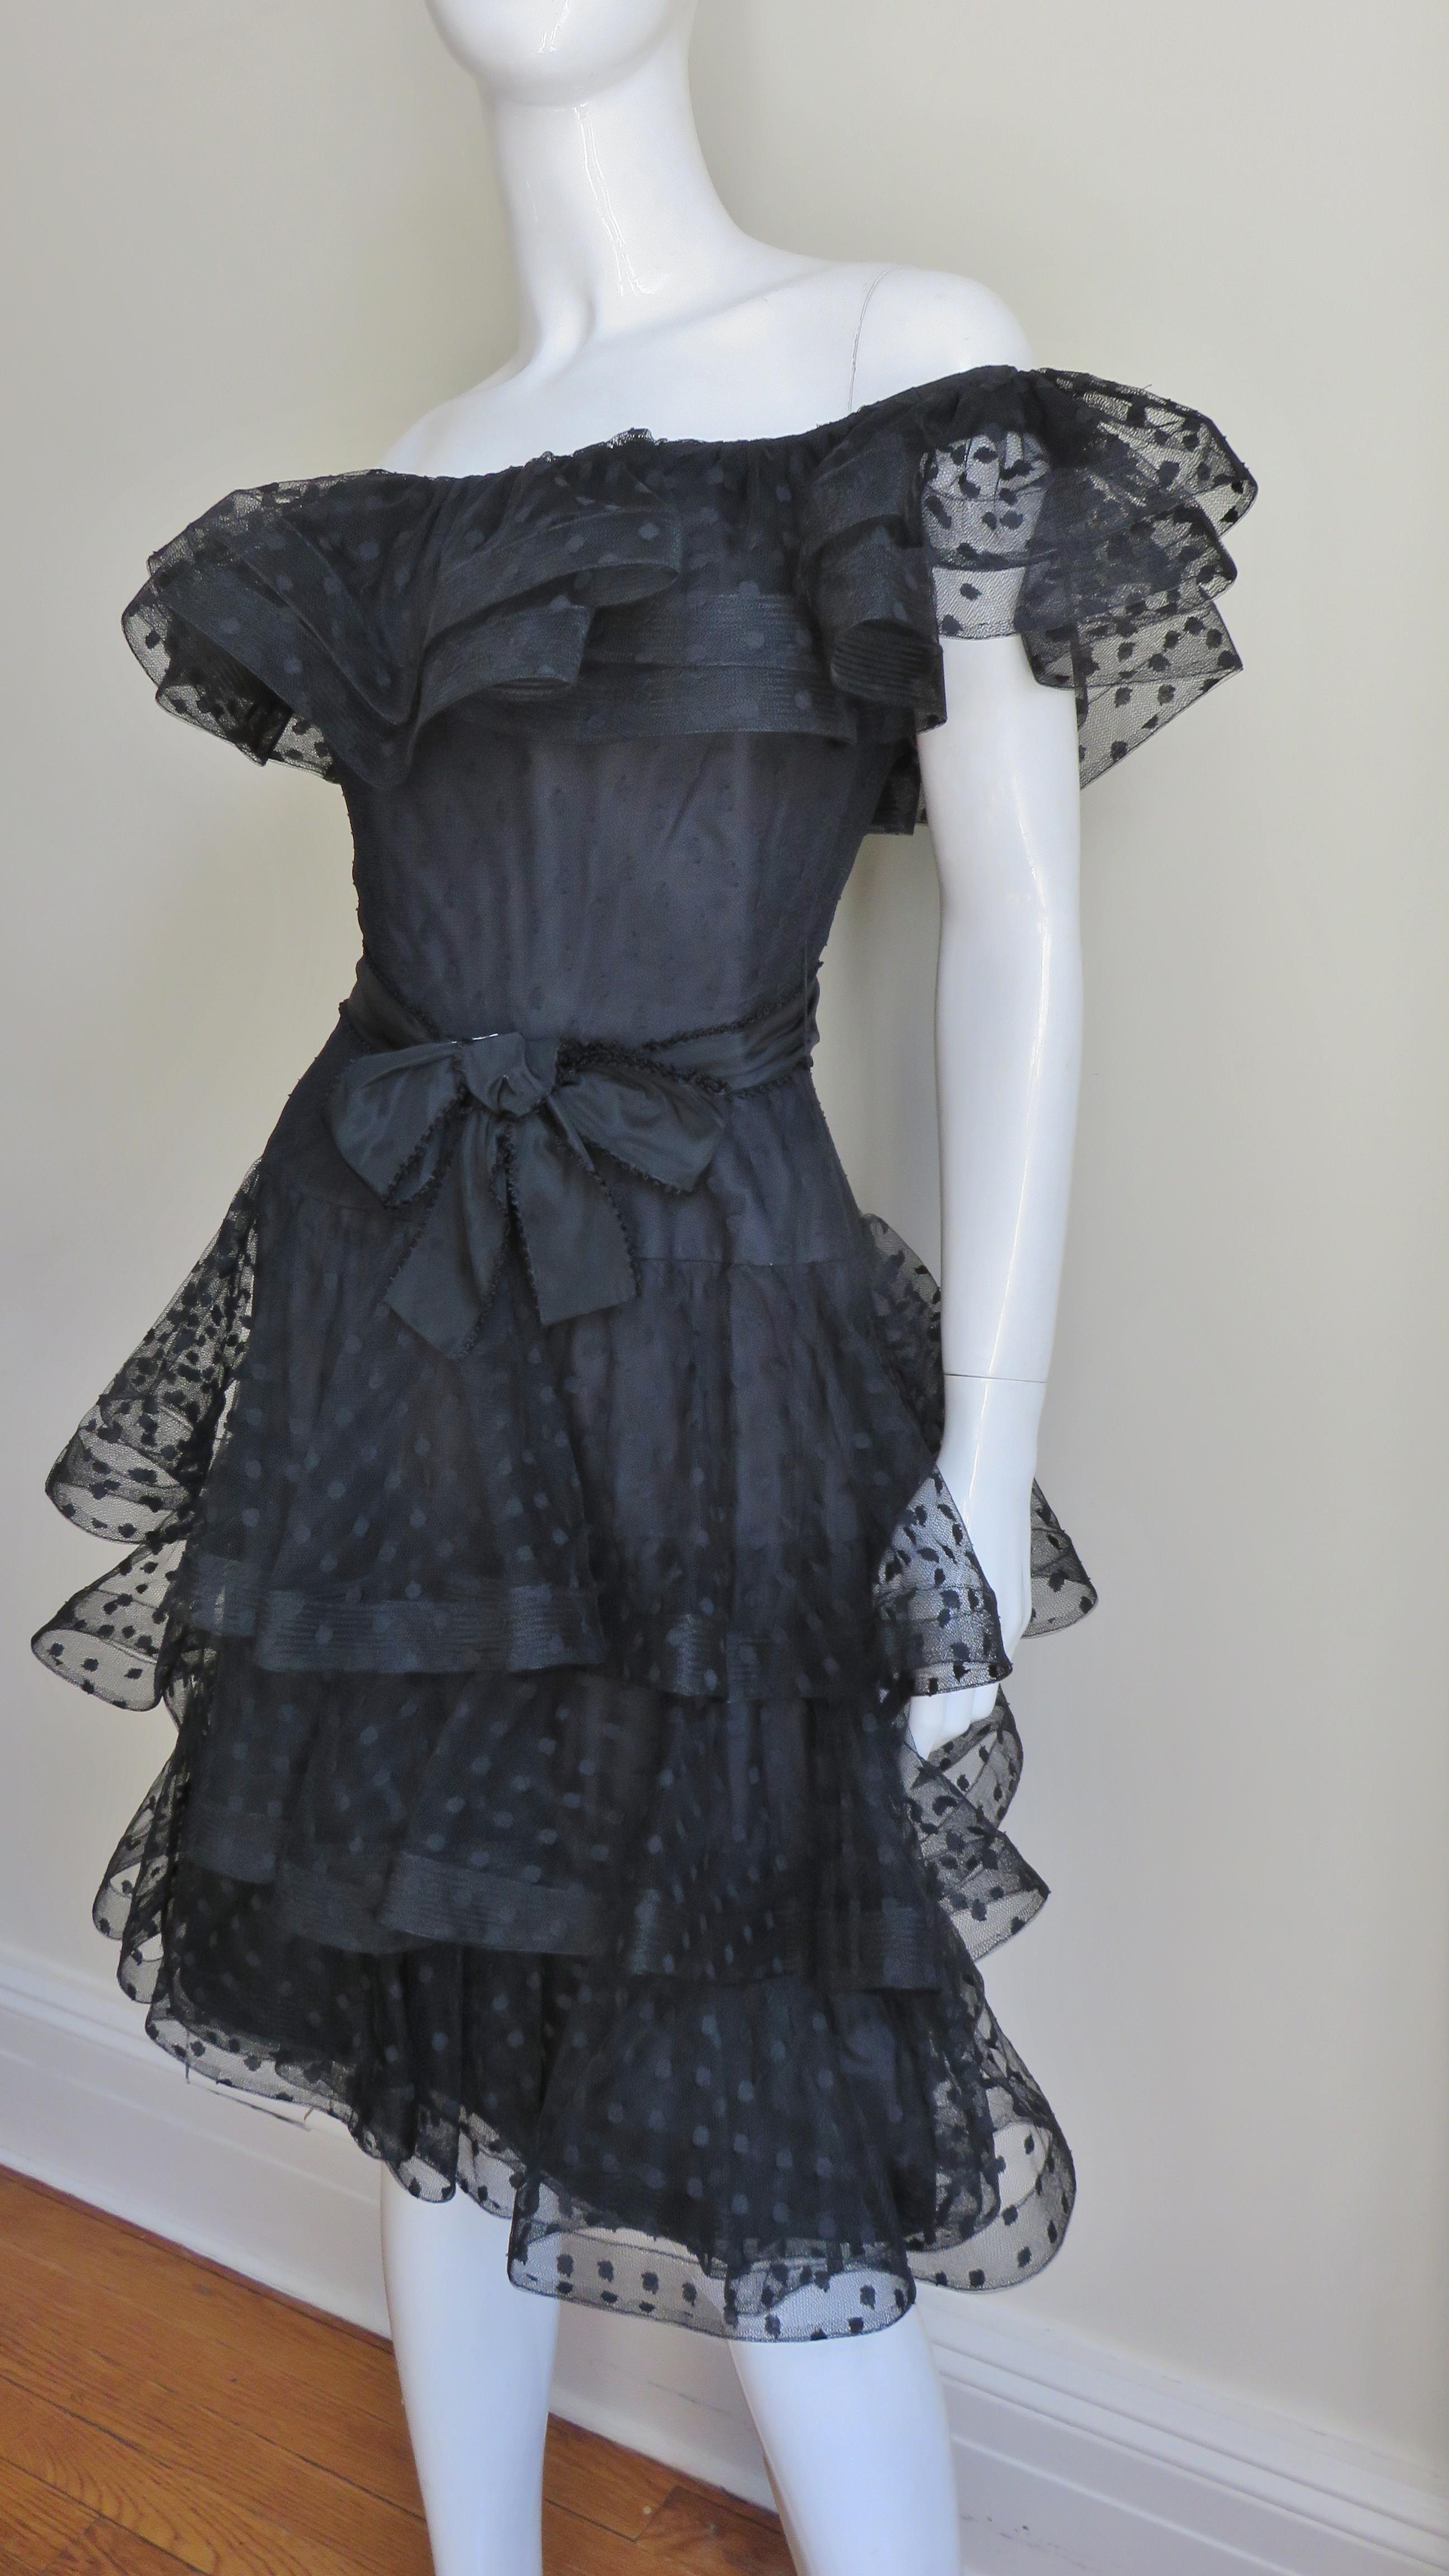 A fabulous black silk ruffle dress by Arnold Scassi.  It is made of black dot flocked silk tulle In ruffled layers around the shoulders and 3 tiered layers creating the skirt.  There is stiffening at their edges giving a them a nice fullness.  It is